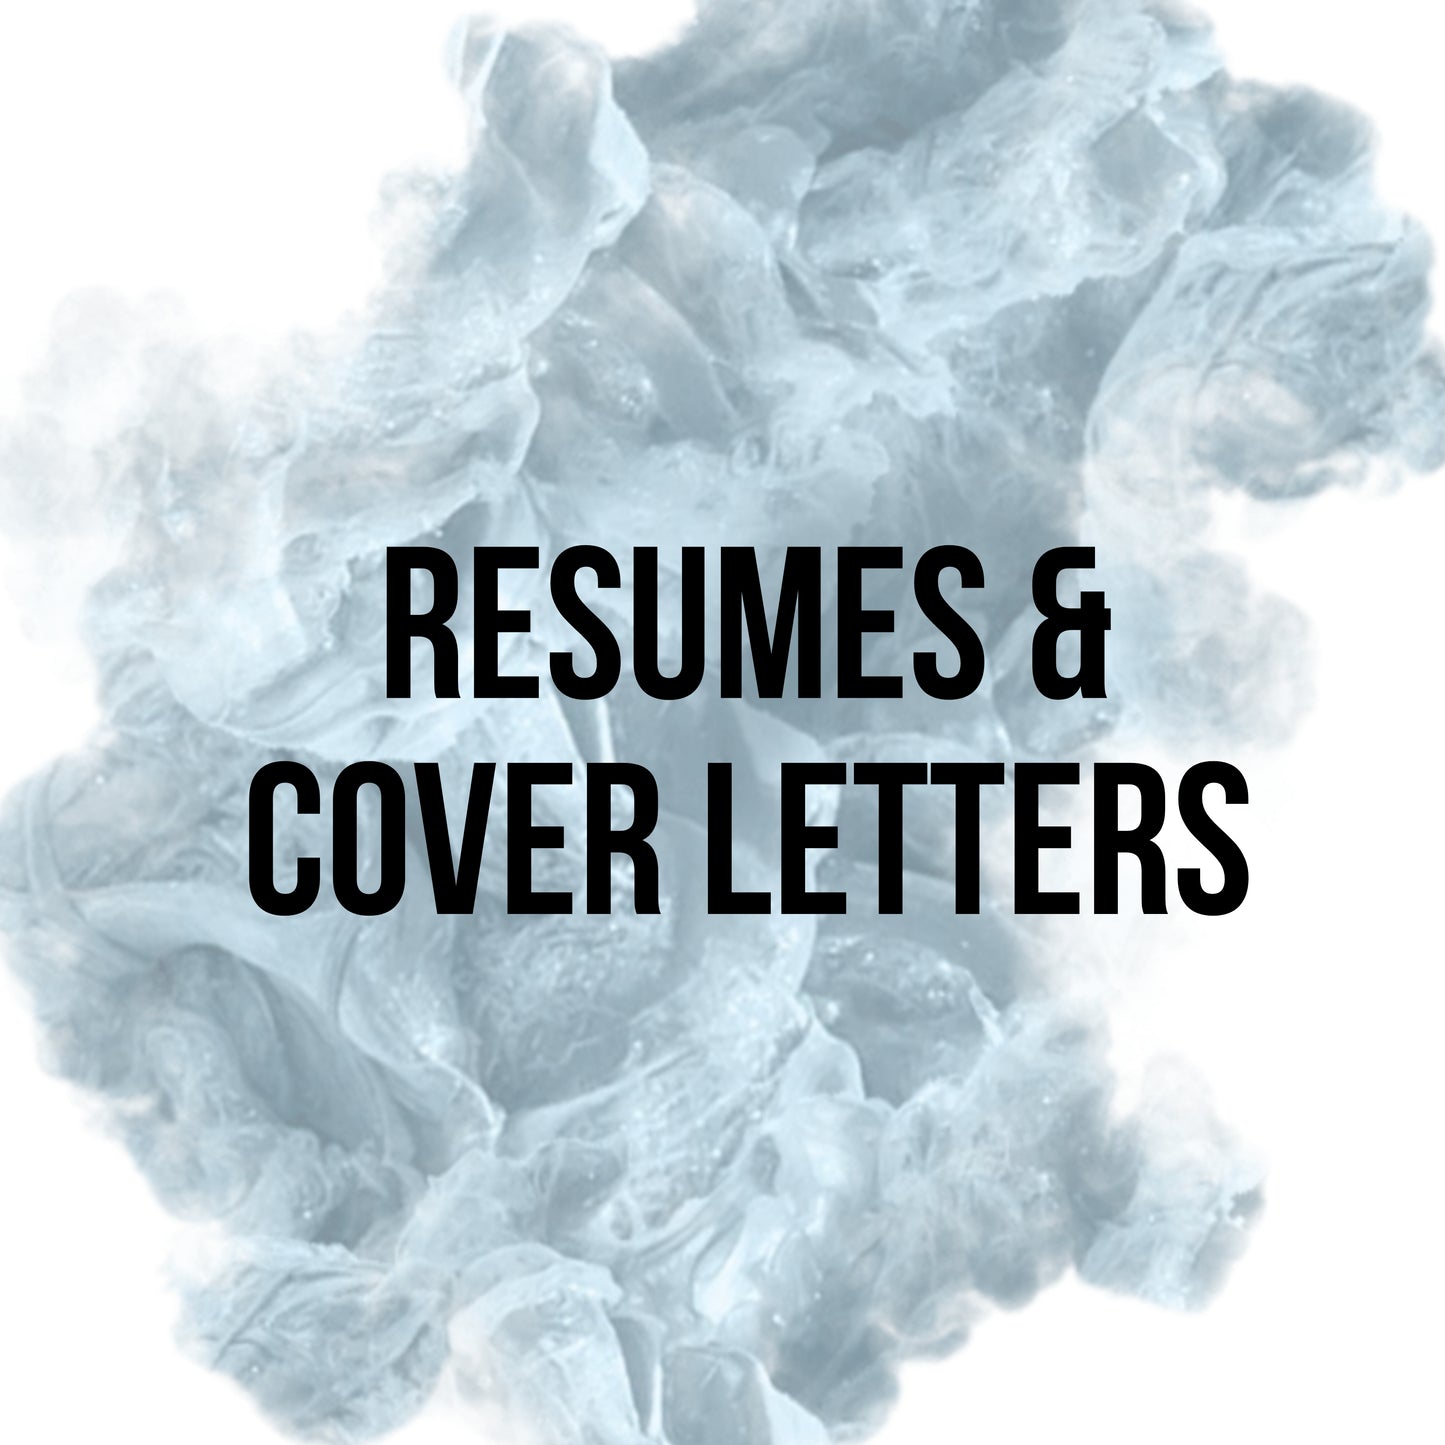 RESUMES & COVER LETTERS